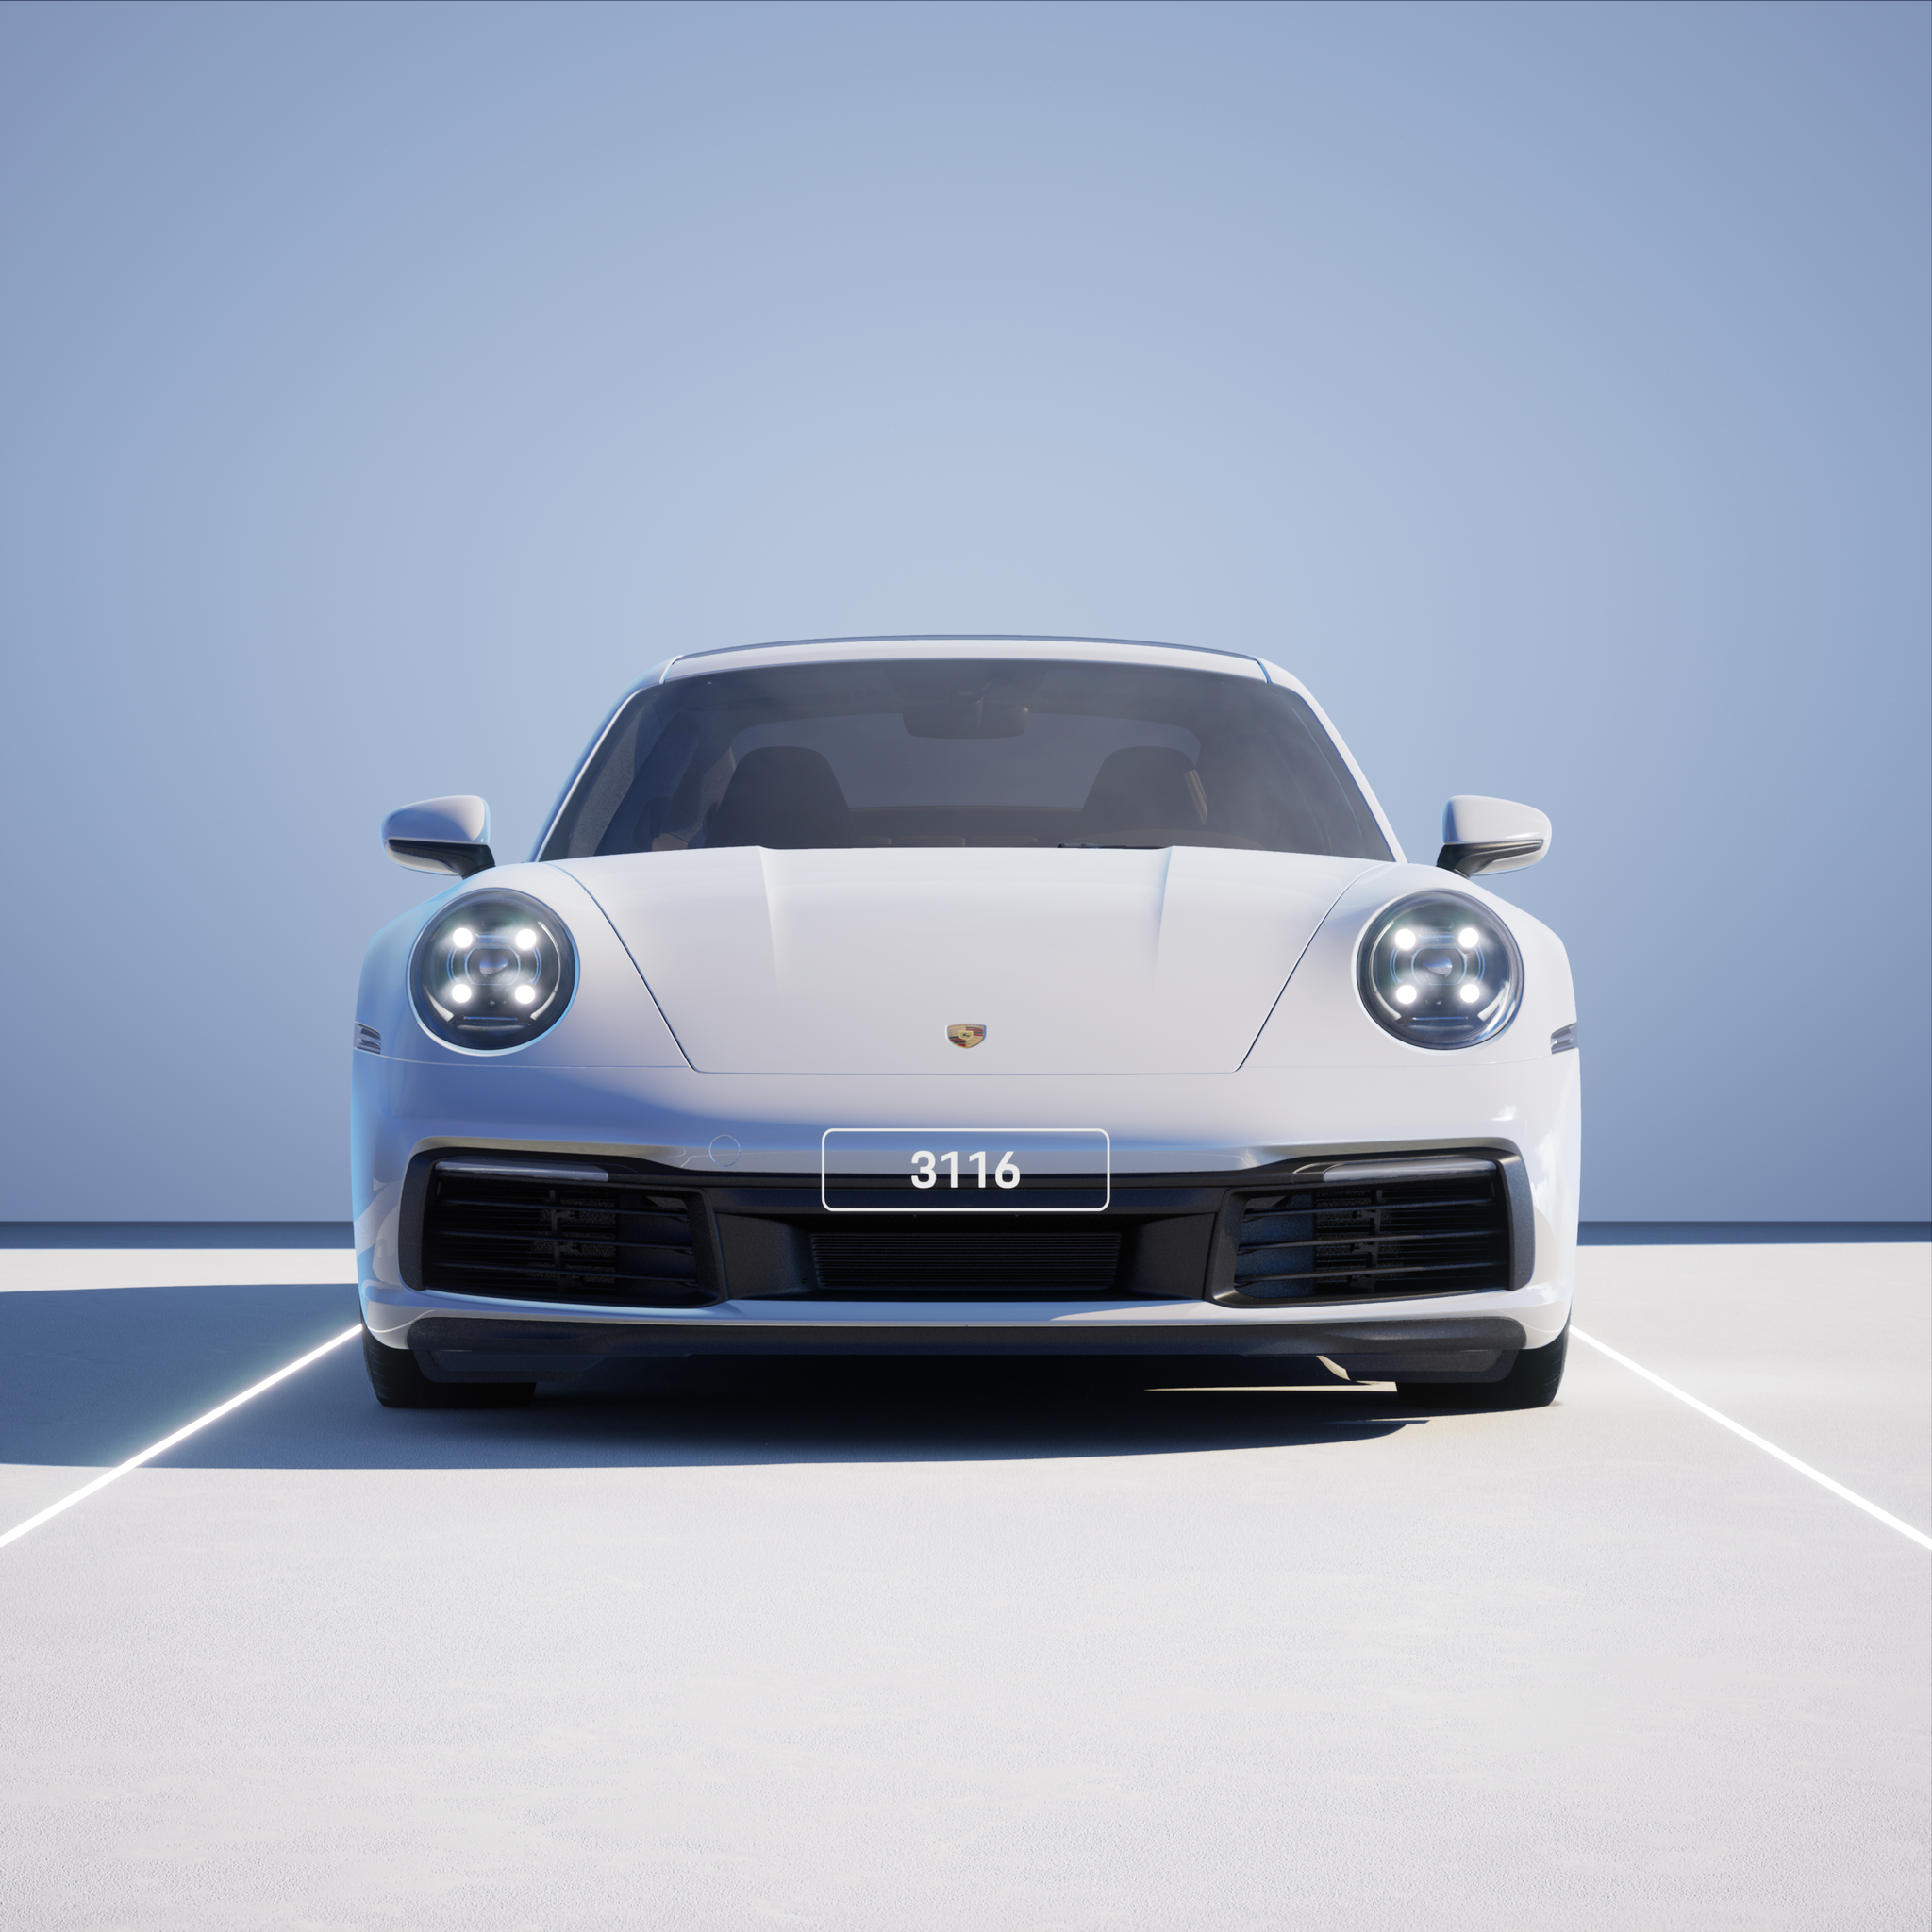 The PORSCHΞ 911 3116 image in phase